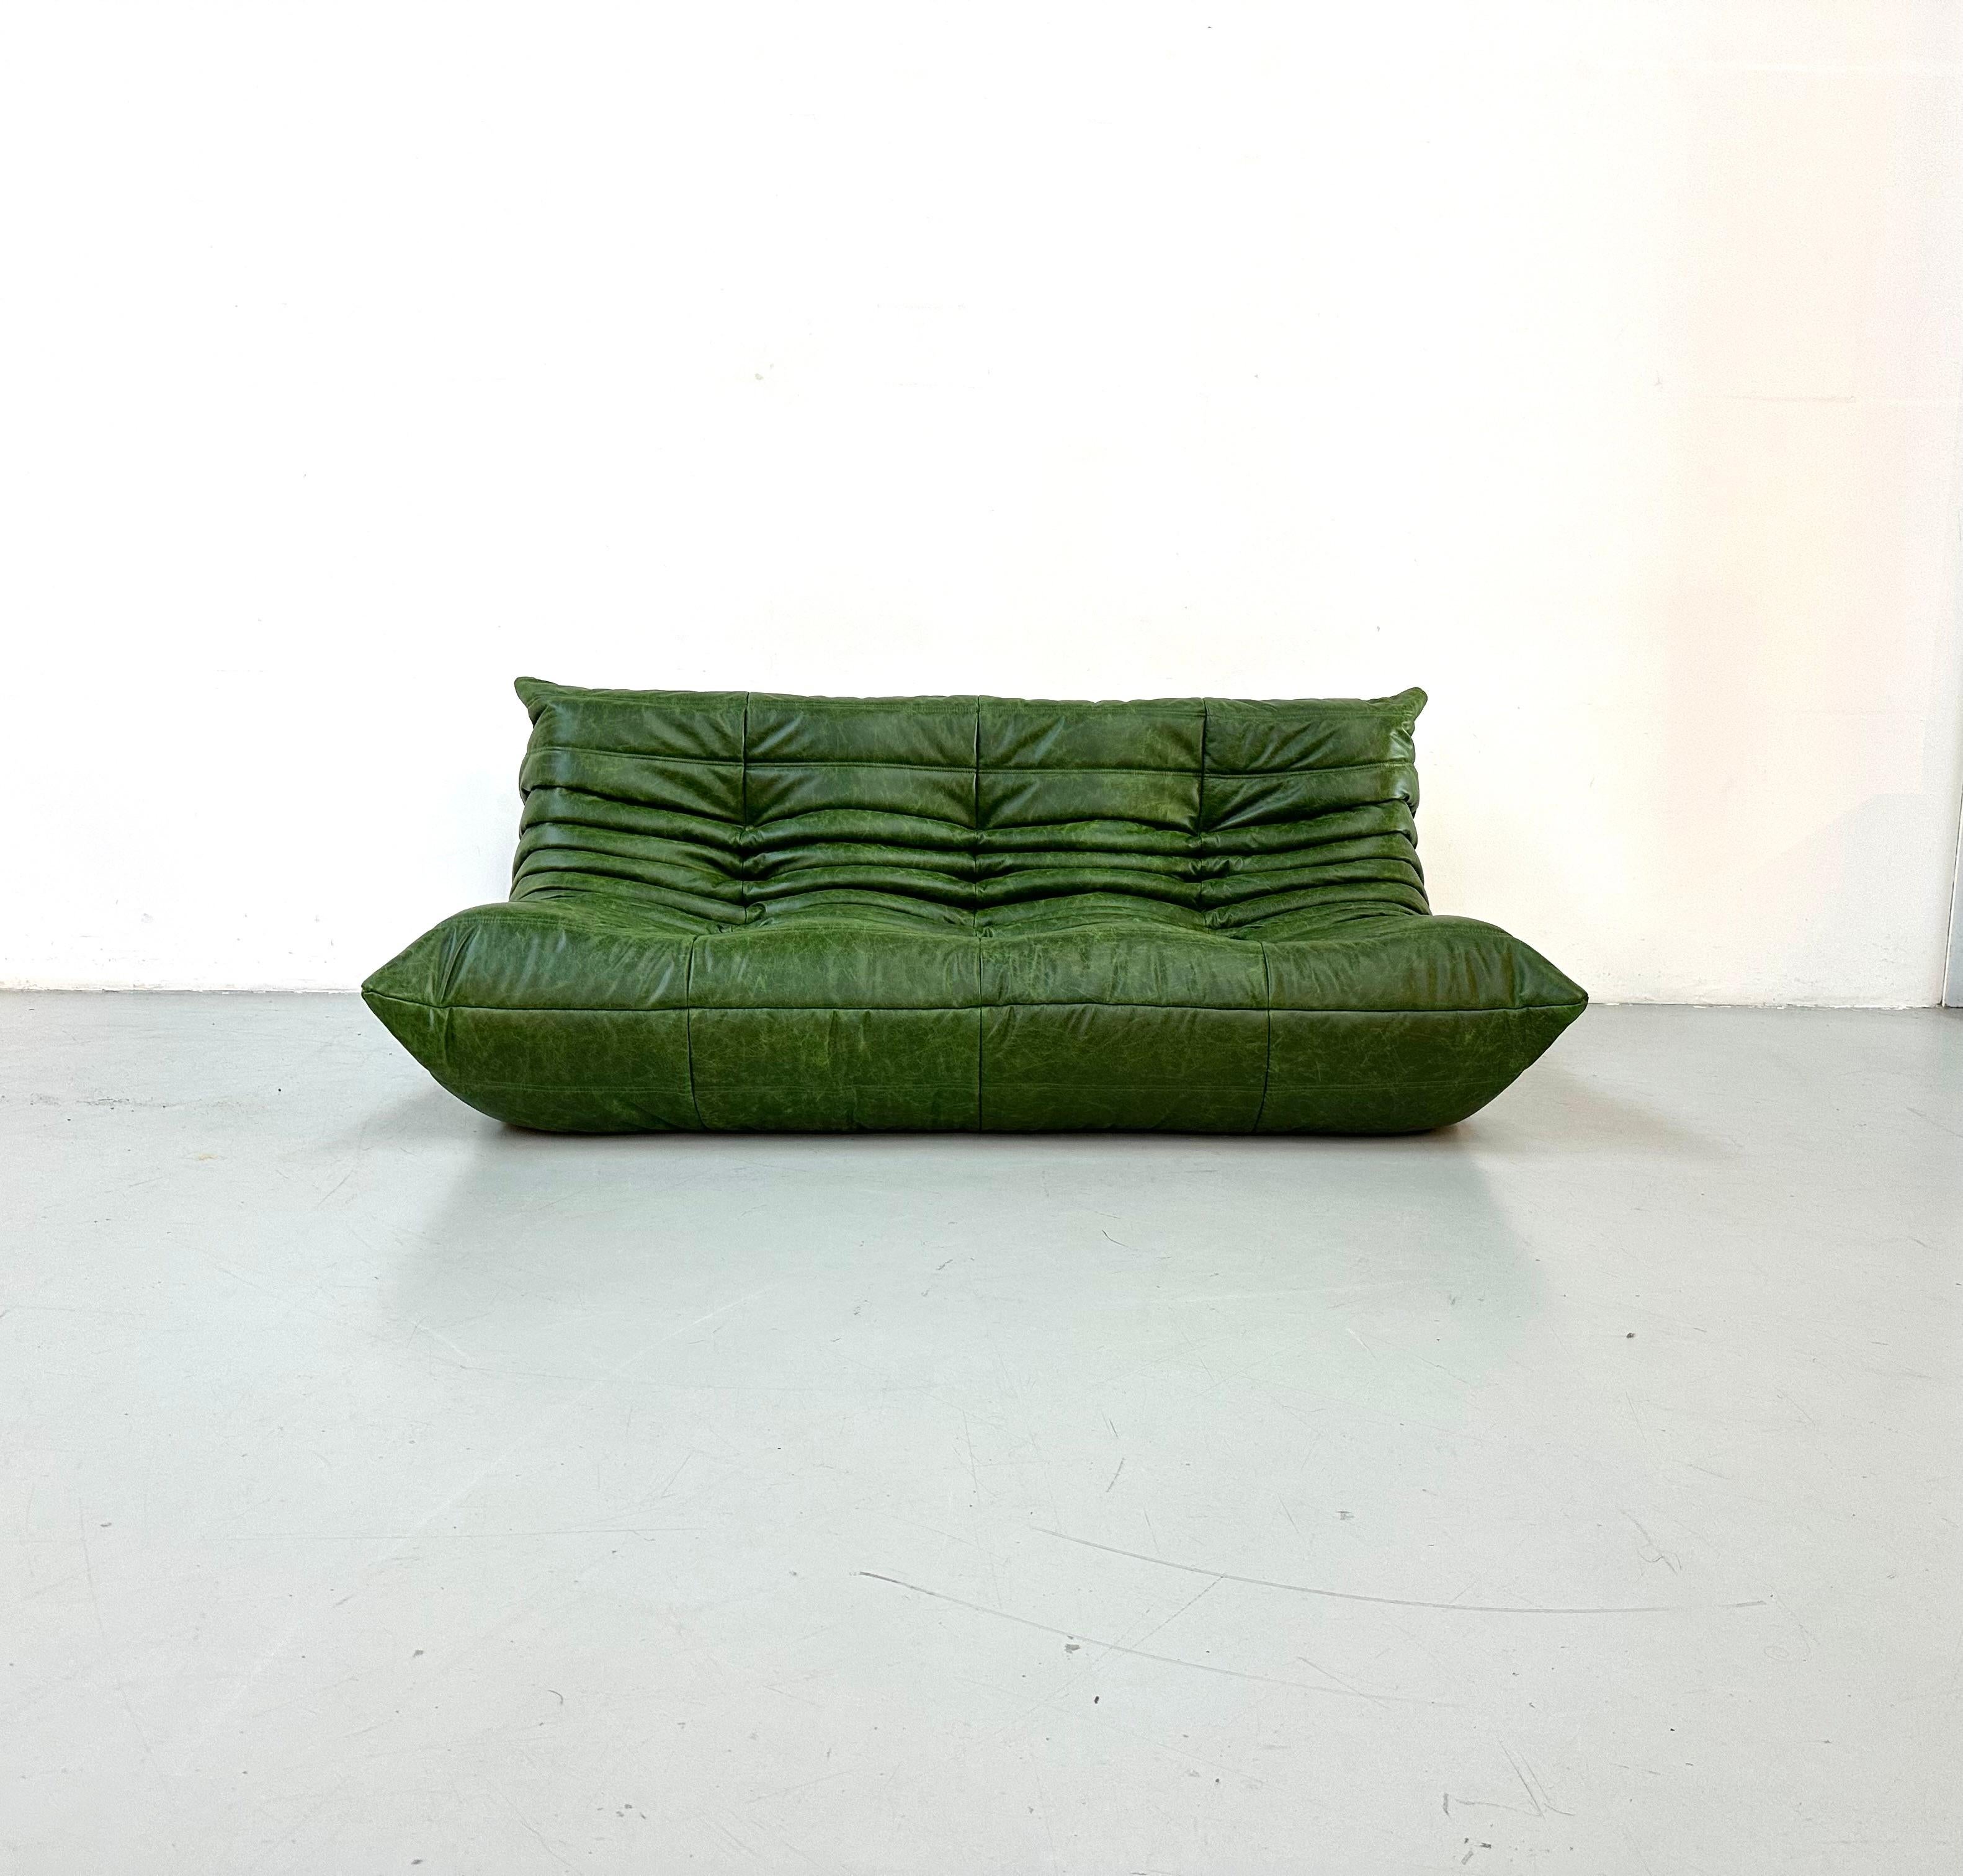 The Togo was designed by Michel Ducaroy in 1973 for Ligne Roset. It is the first sofa/chair ever made only of foam, so totally frameless. The innerwork consists of foam in 5 different densities. Thereafter the sofa is reupholstered.
